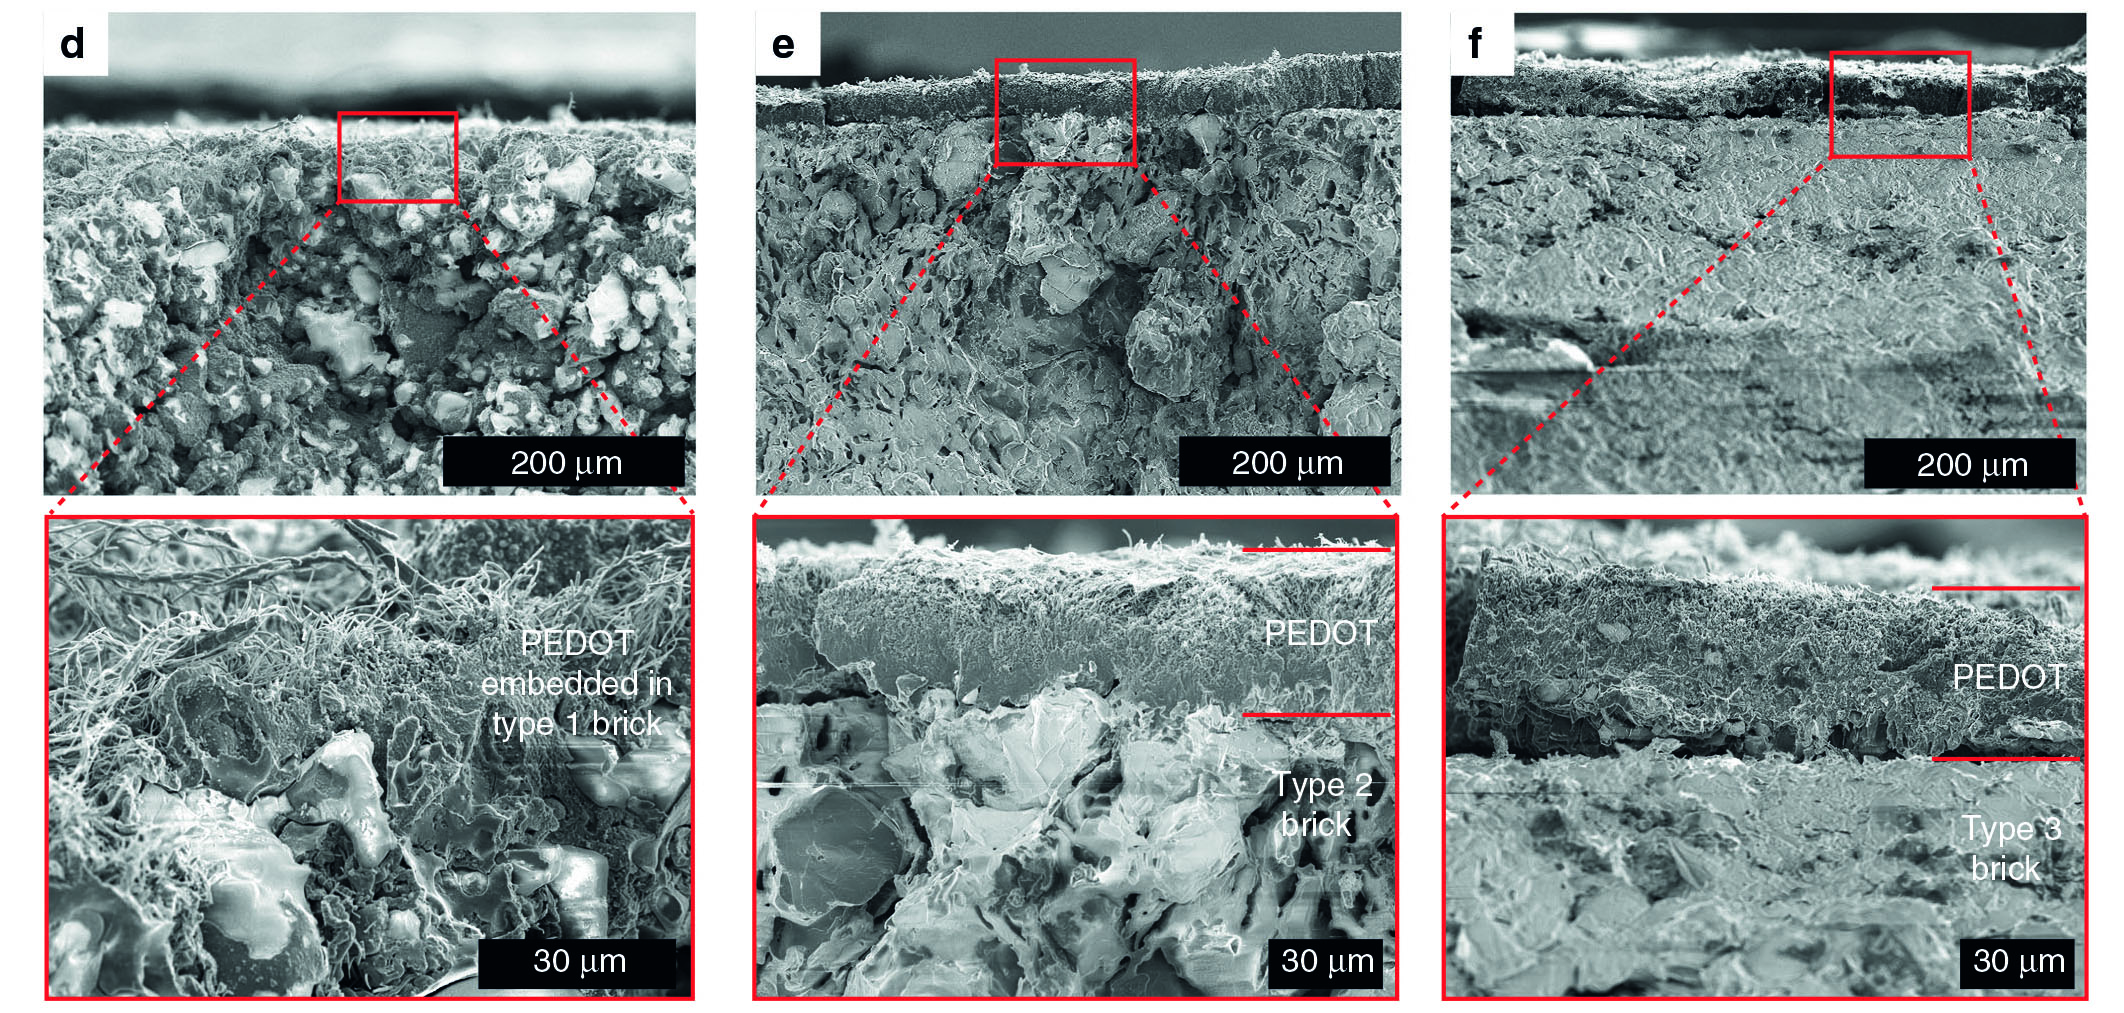 Scanning electron microscope image showing the fibrous PEDOT layer on the surface of three different bricks with varying porosity. 